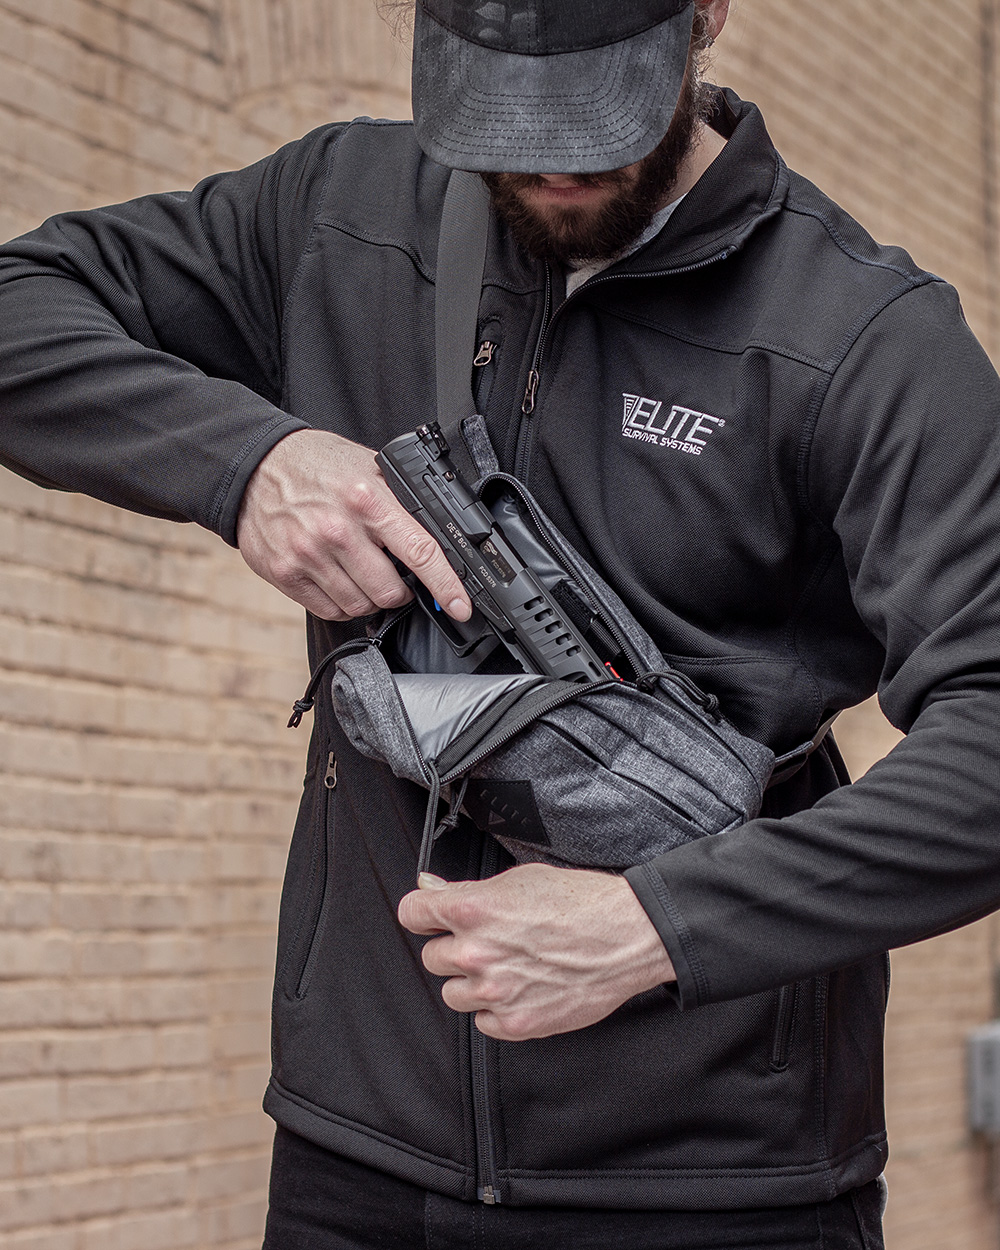 Tactical Hip Pack for Concealed Firearms by Elite Survival